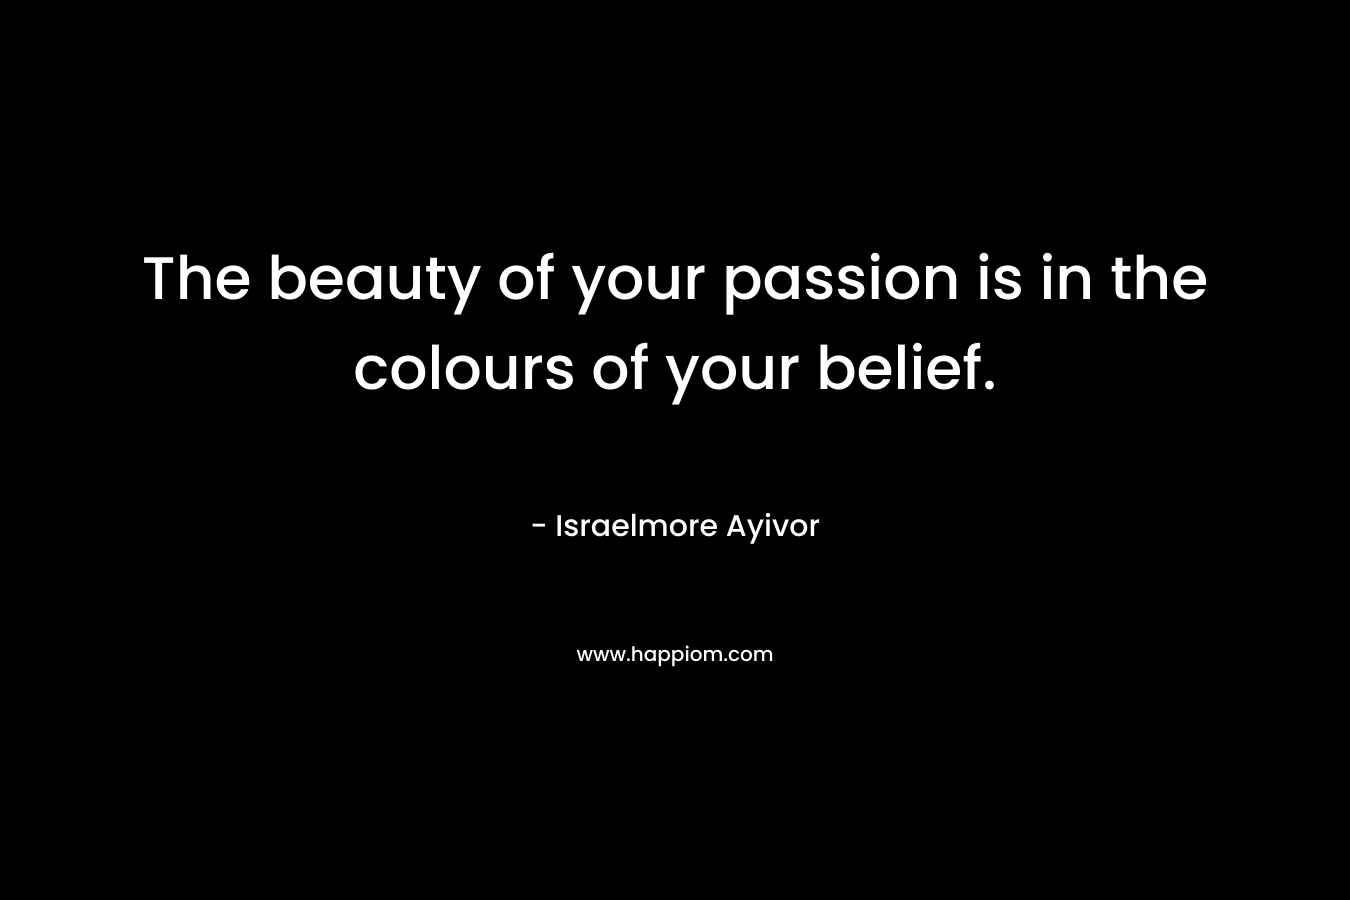 The beauty of your passion is in the colours of your belief.